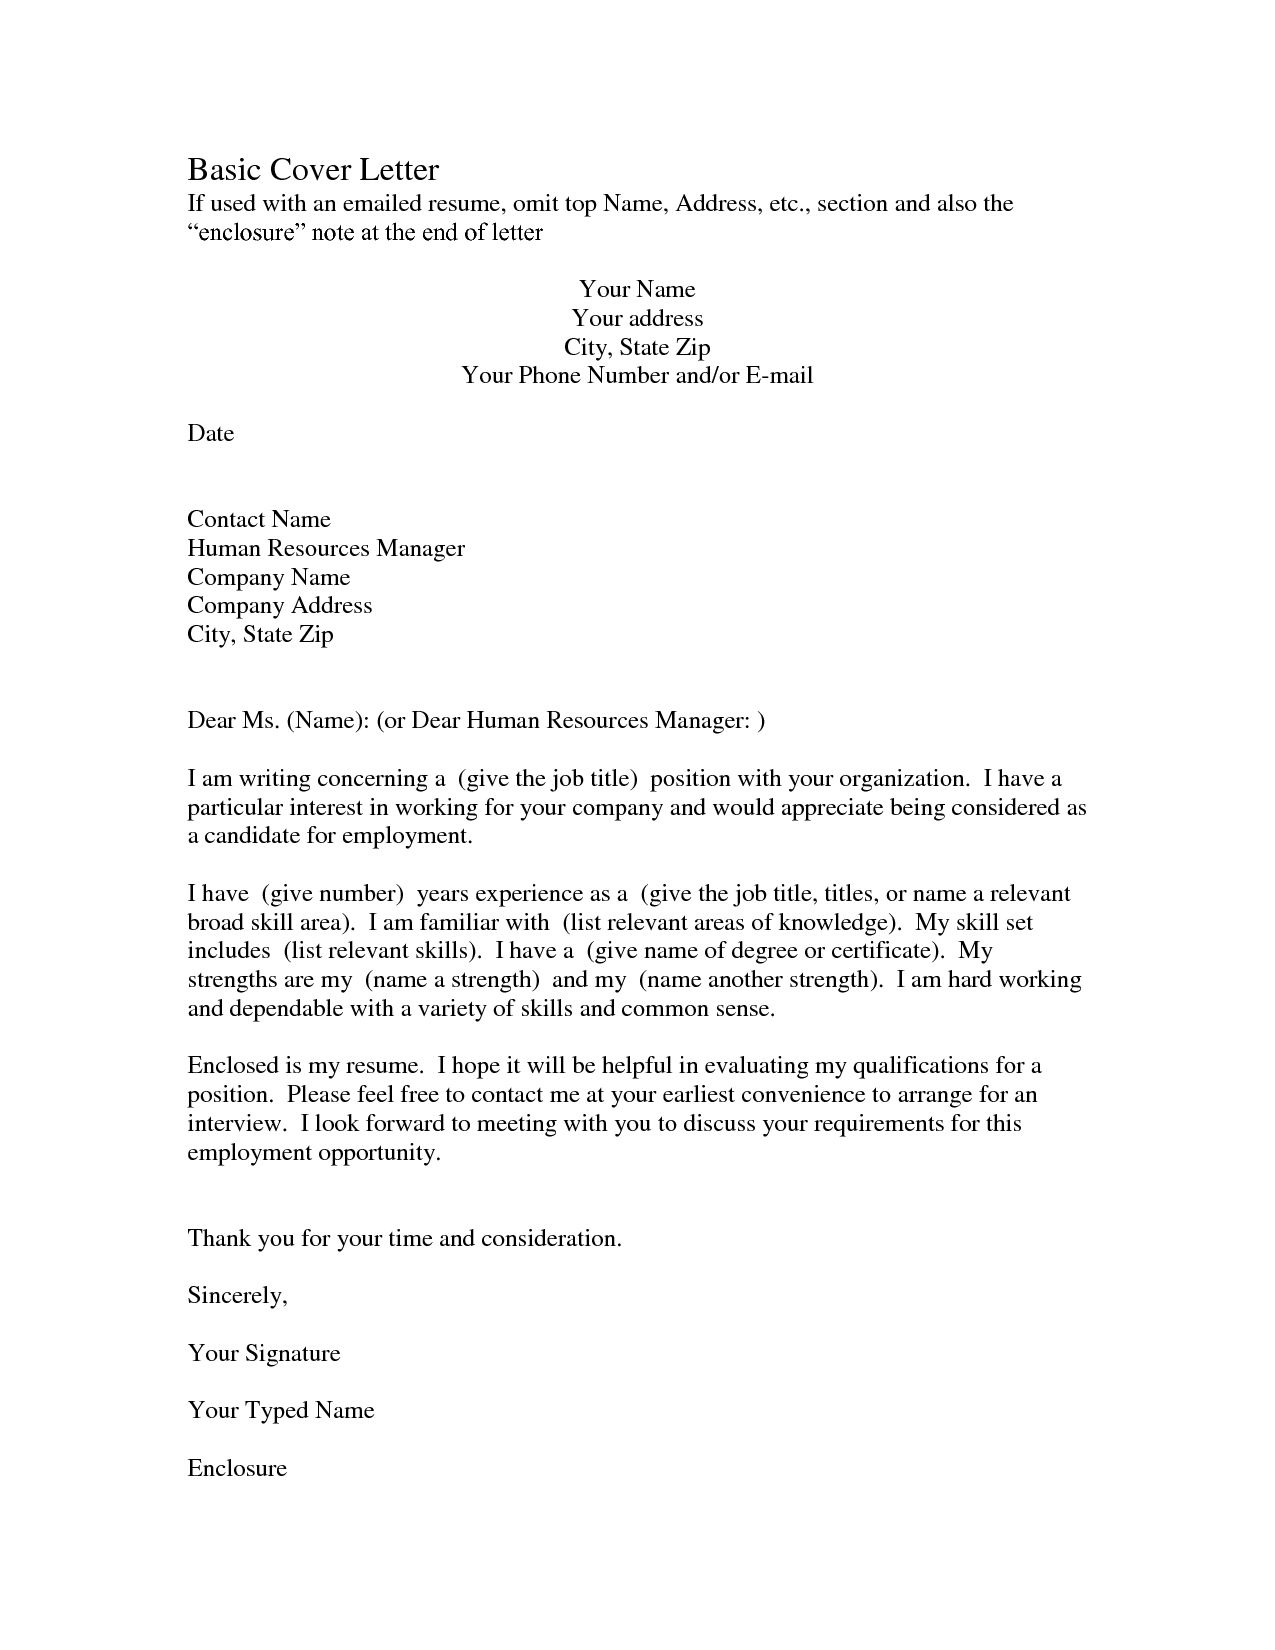 Ministry Support Letter Template - This Cover Letter Sample Shows How A Resumes for Teachers Can Help